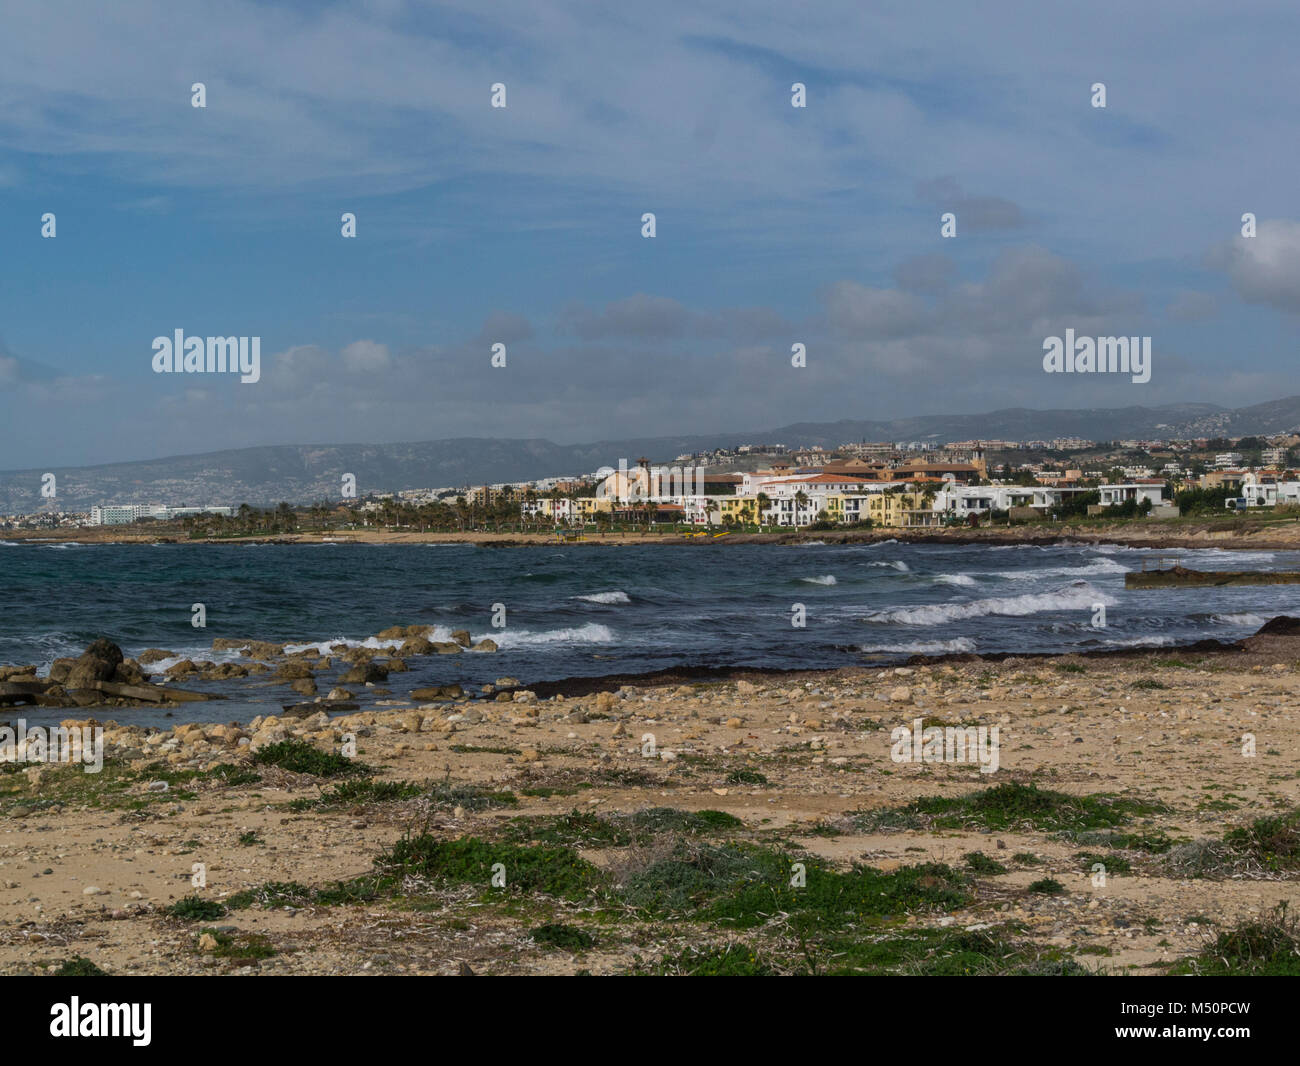 View from Paphos coastal path towards Kefalos Beach Old Market Area Panp Pafos Upper Pafos Cyprus on a lovely February winters day weather Stock Photo